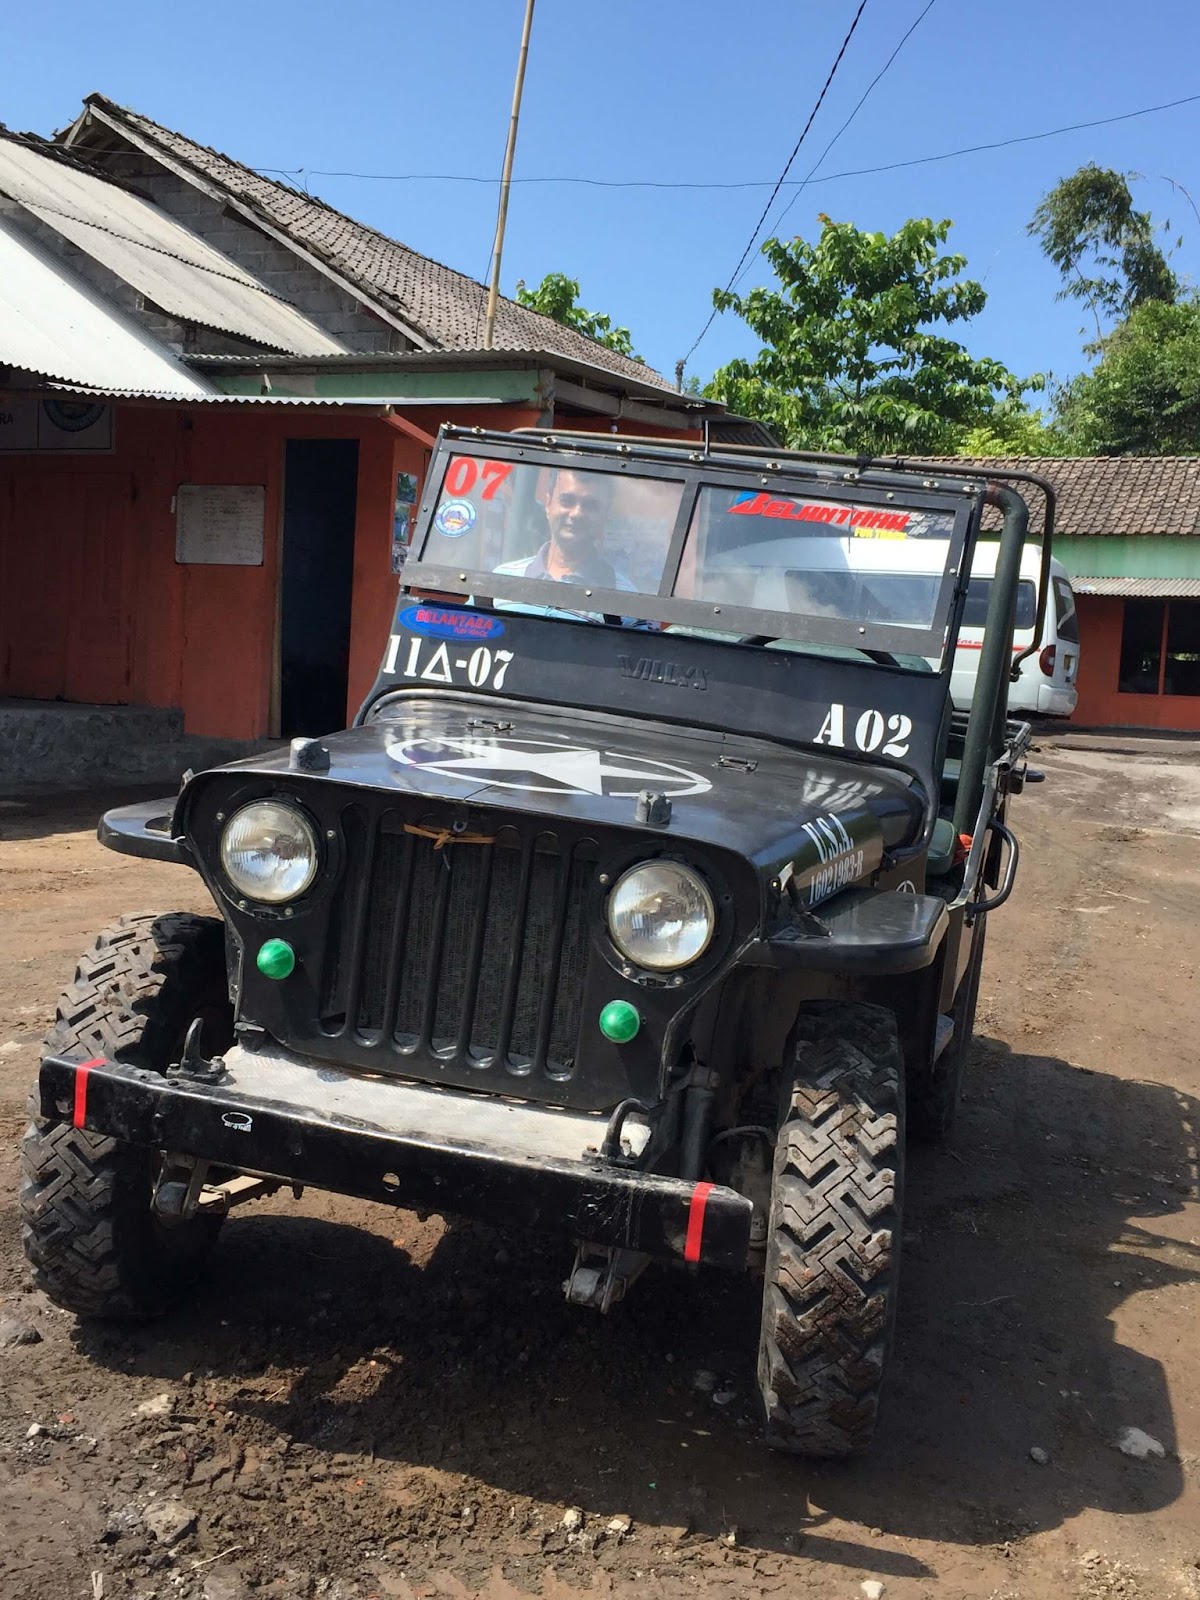 3 days in Yogyakarta, our jeep ride to the ruins of a village near Mount Merapi